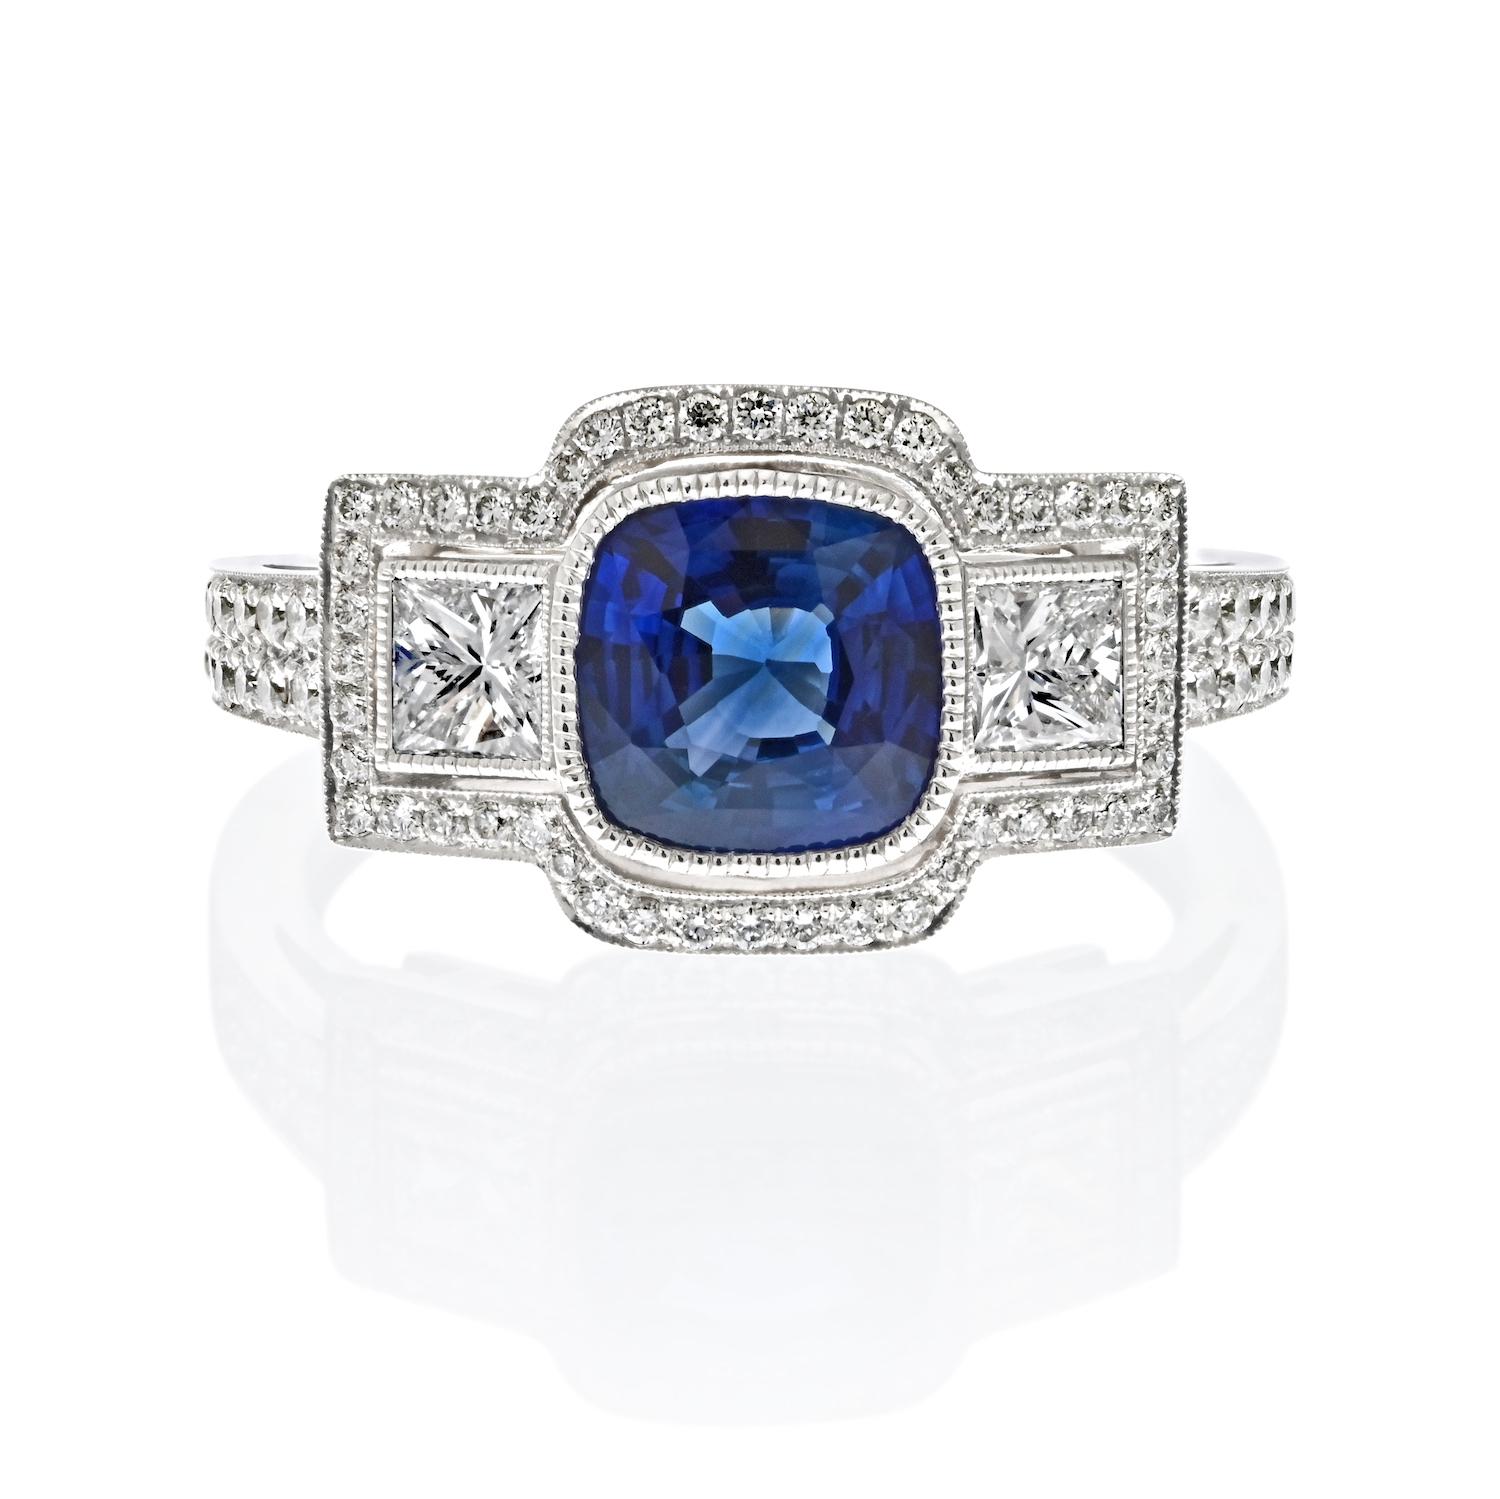 Elegance in Every Facet: The Blue Sapphire and Diamond Ring.

Behold a mesmerizing masterpiece in this exquisite ring, where the luminance of precious gemstones meets the brilliance of exceptional craftsmanship.

**The Star of the Show: A Pure Blue